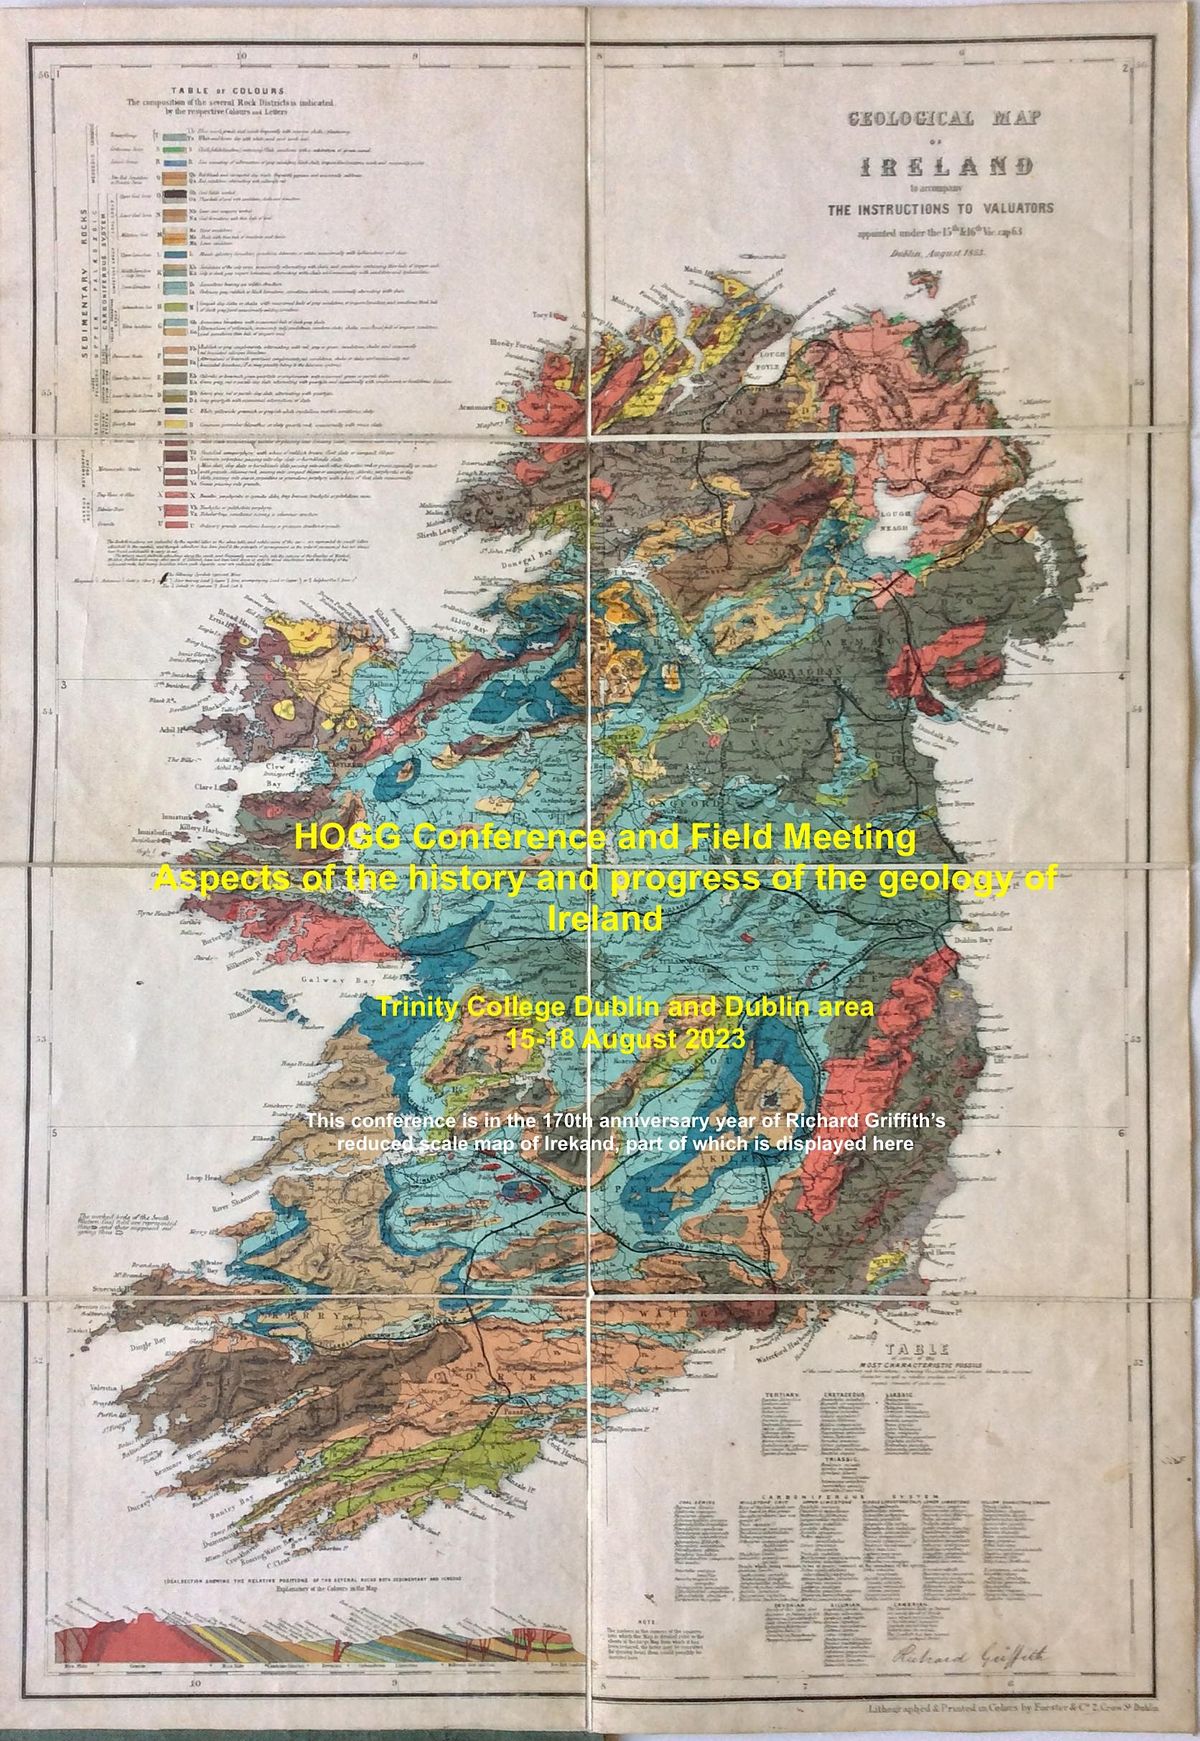 Aspects of the History and Progress of Geology in Ireland